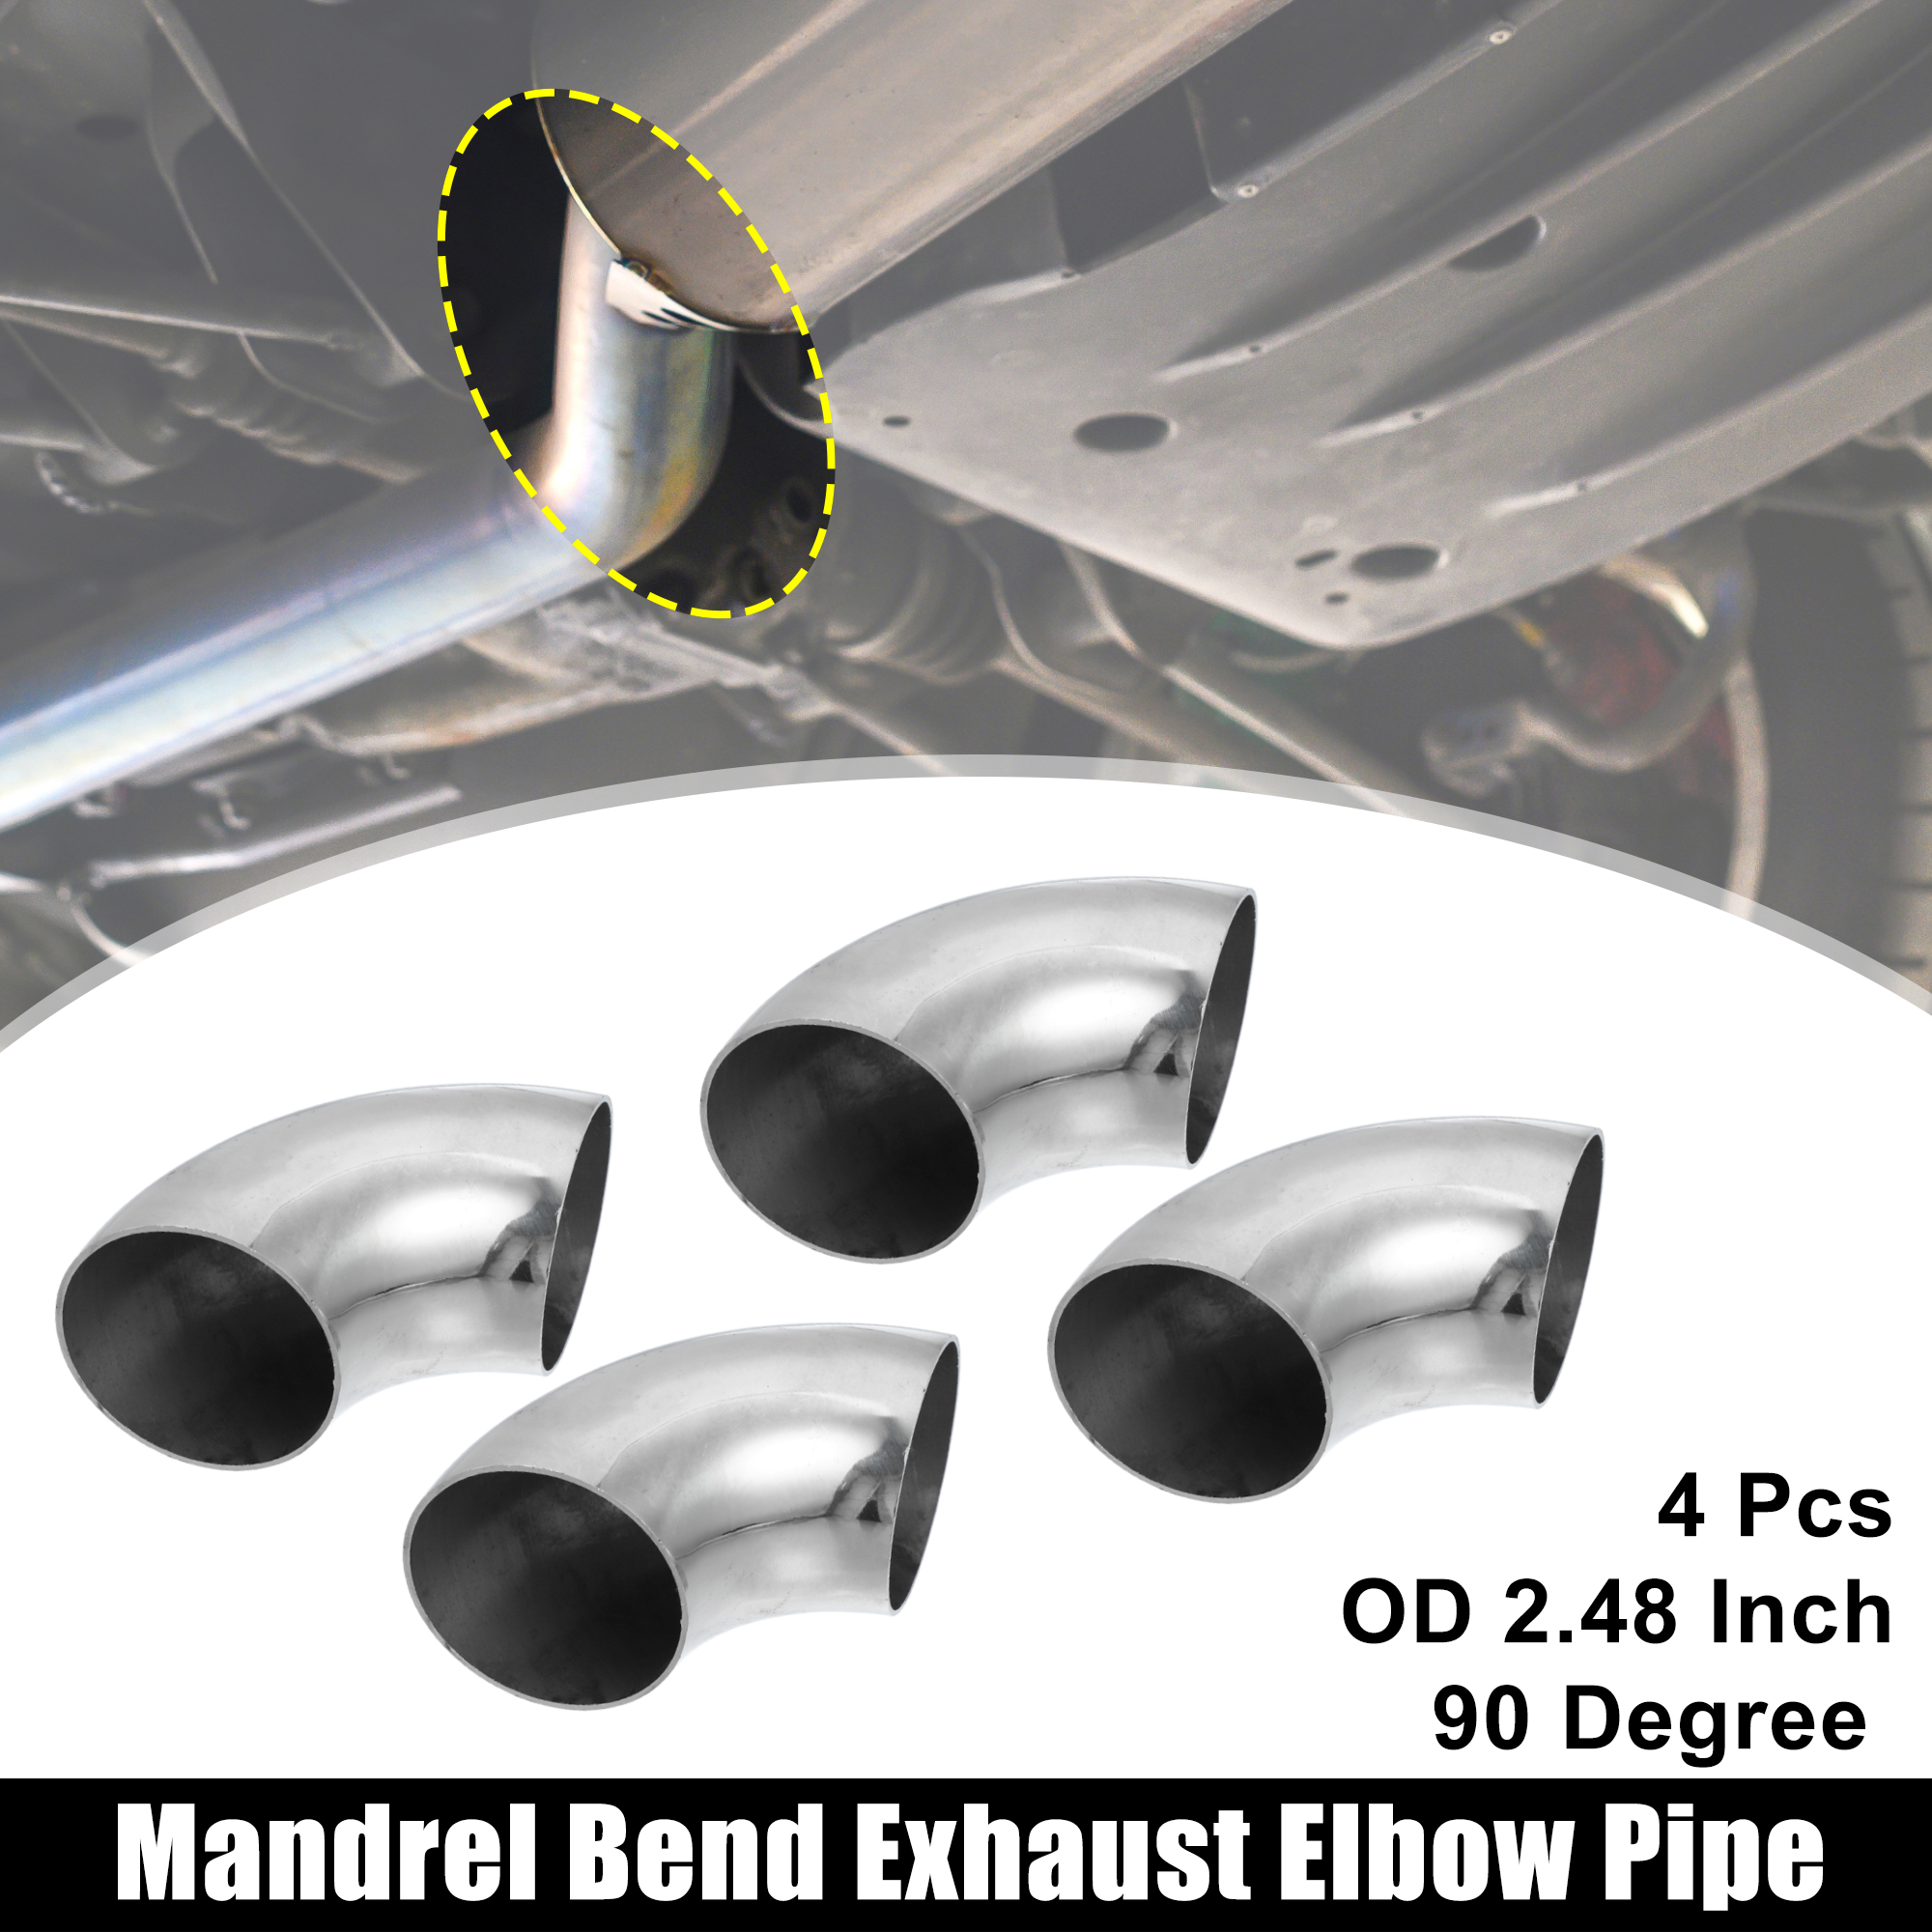 Unique Bargains 4pcs OD 2.5'' 90 Degree Mandrel Bend Elbow Stainless Steel Bend Exhaust Tube